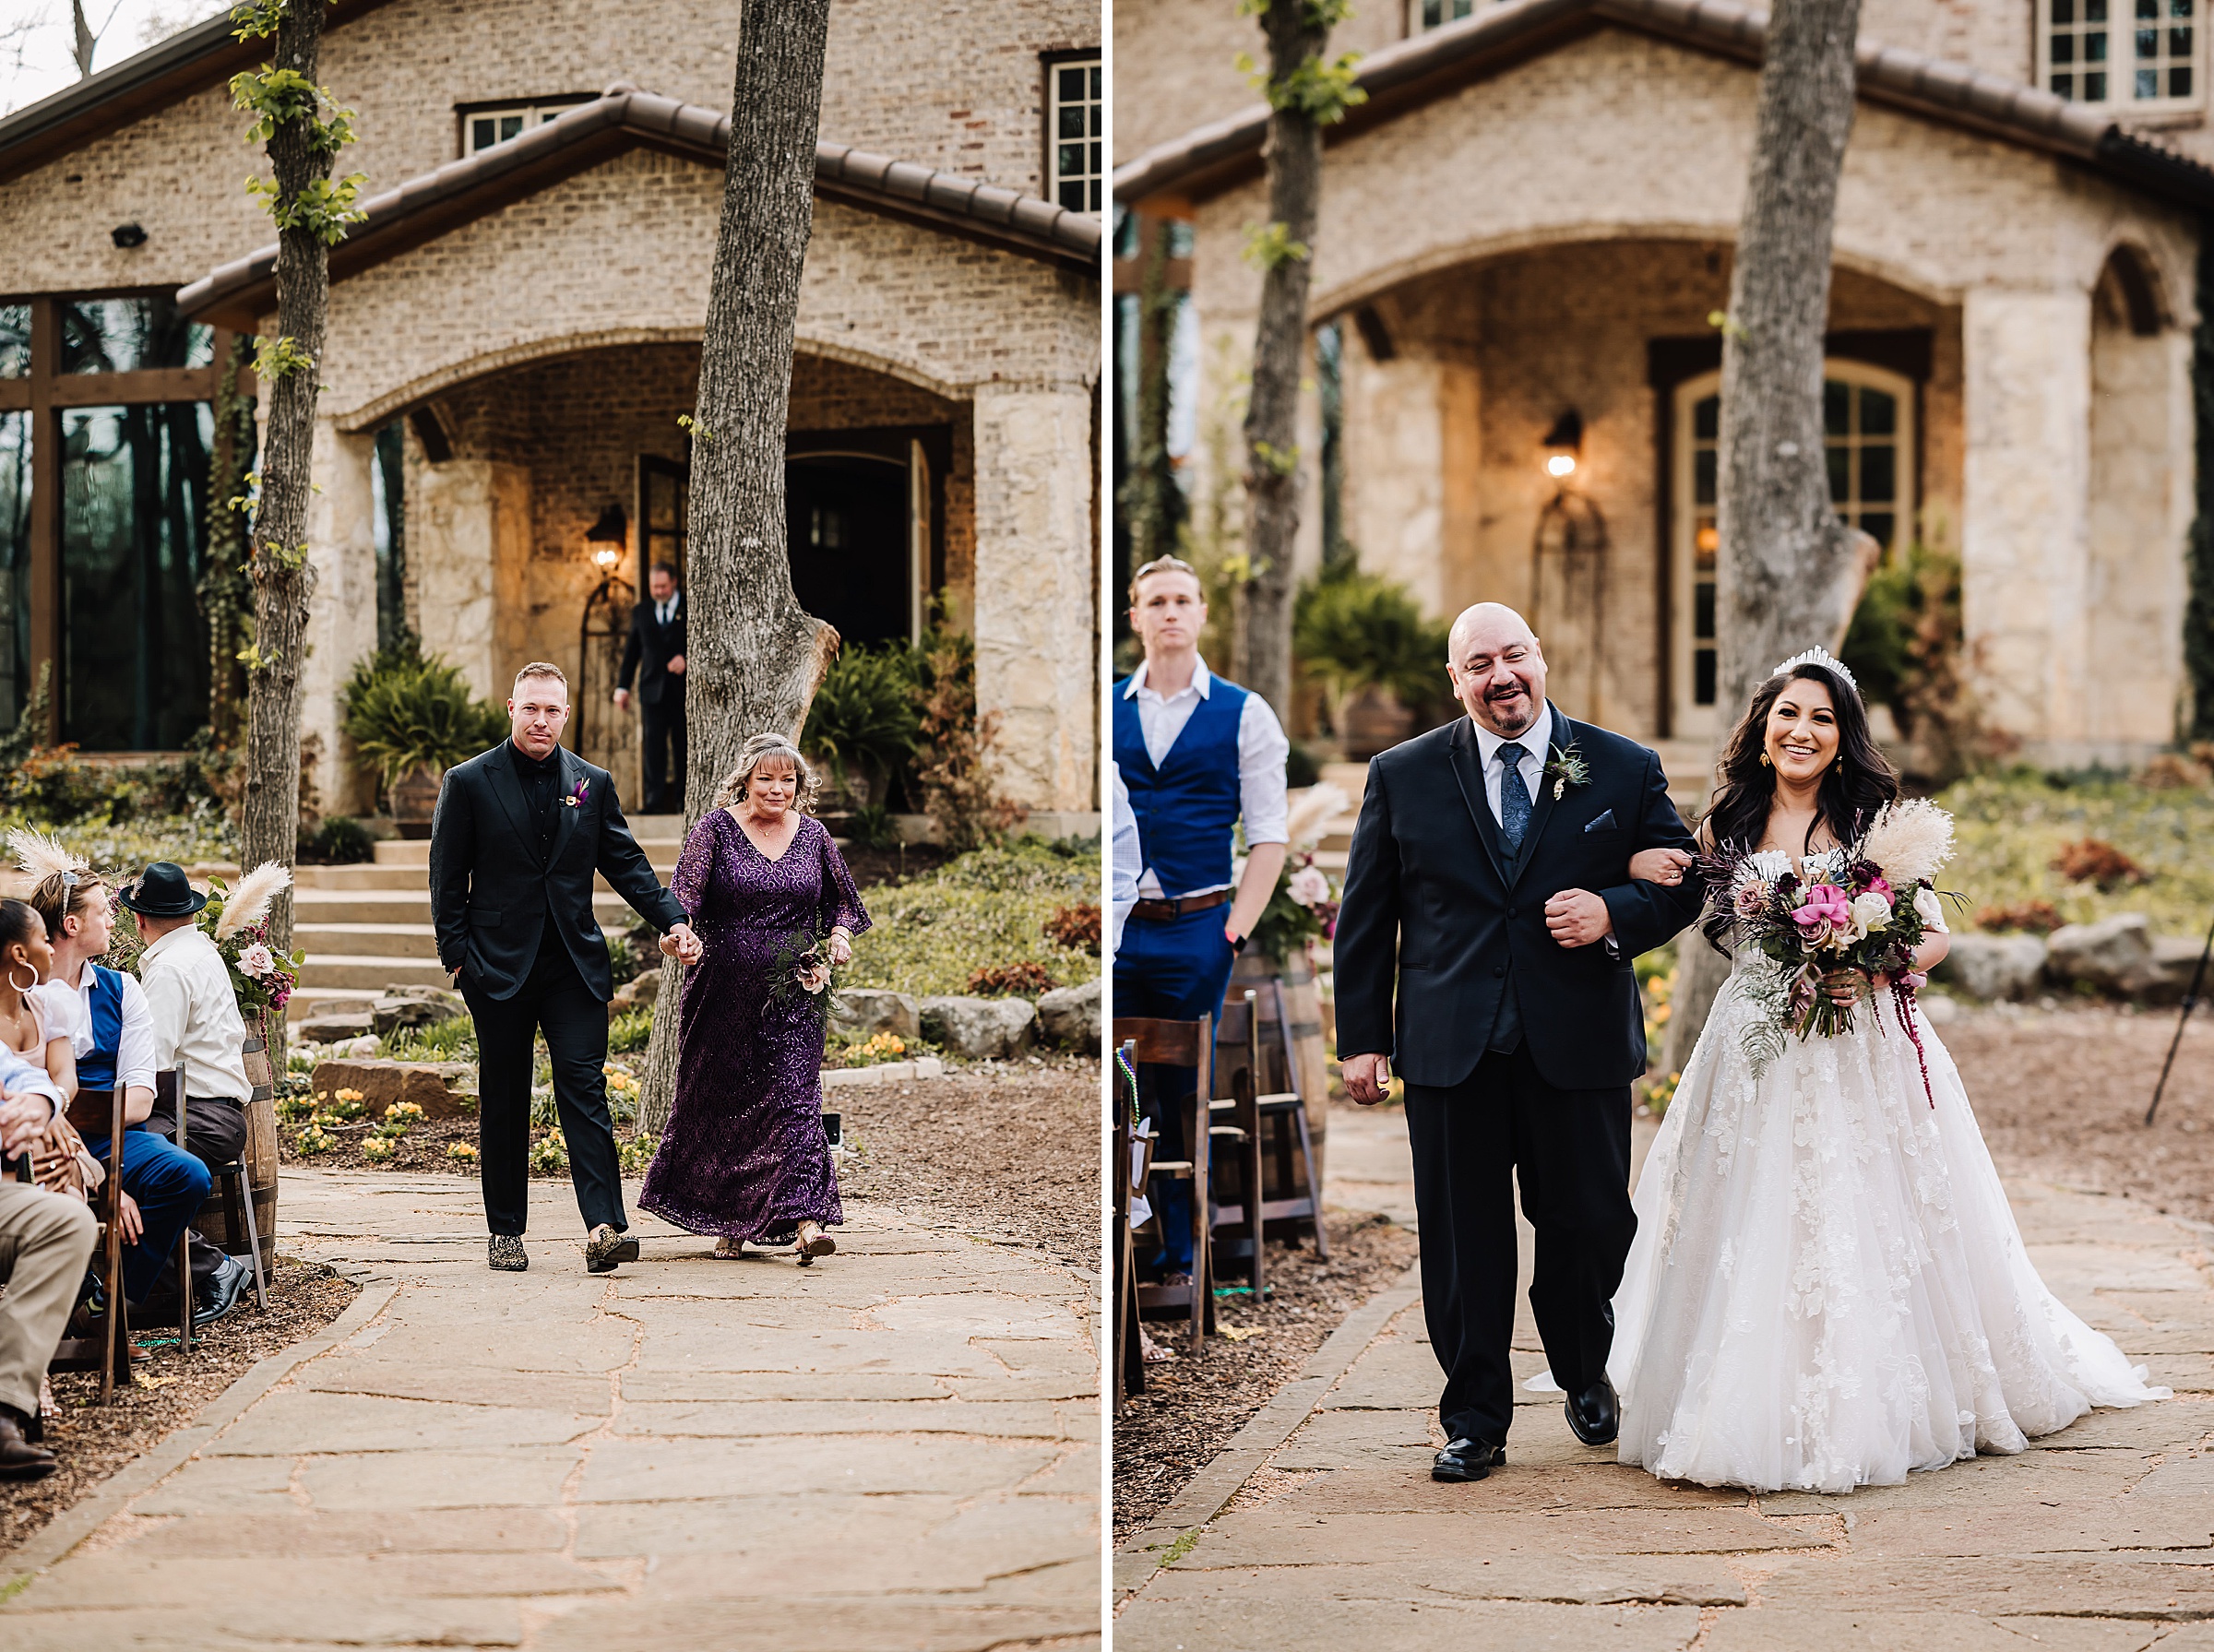 wedding processional in outdoor ceremony